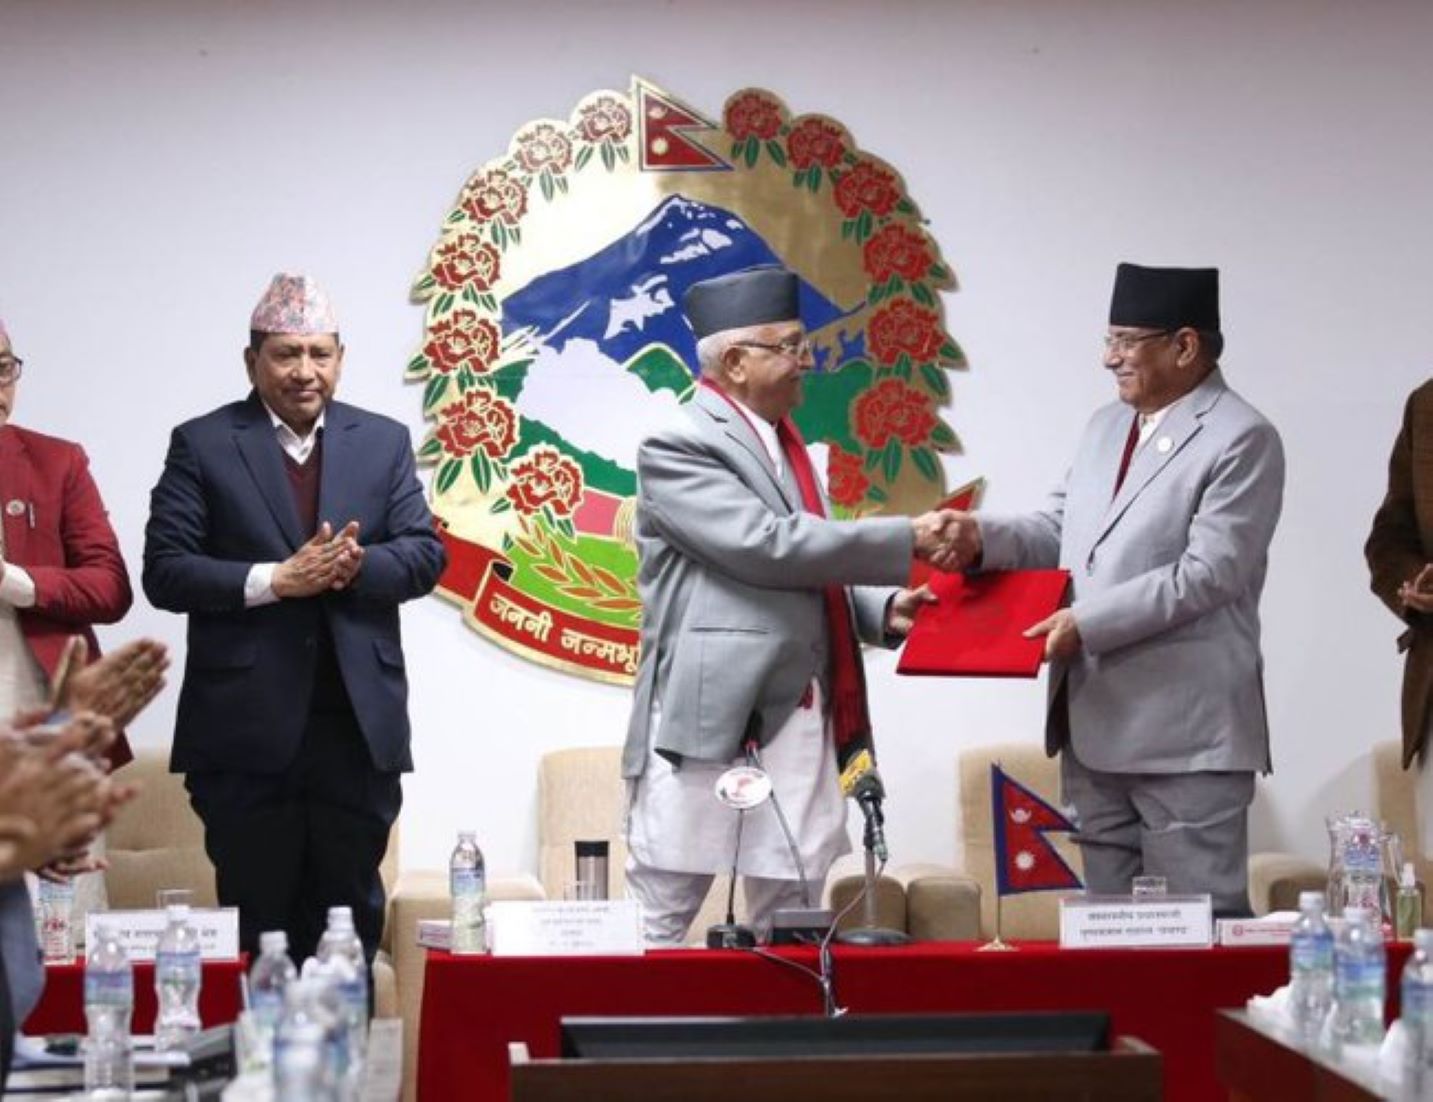 Splinter Group Joins Nepal’s Coalition Government